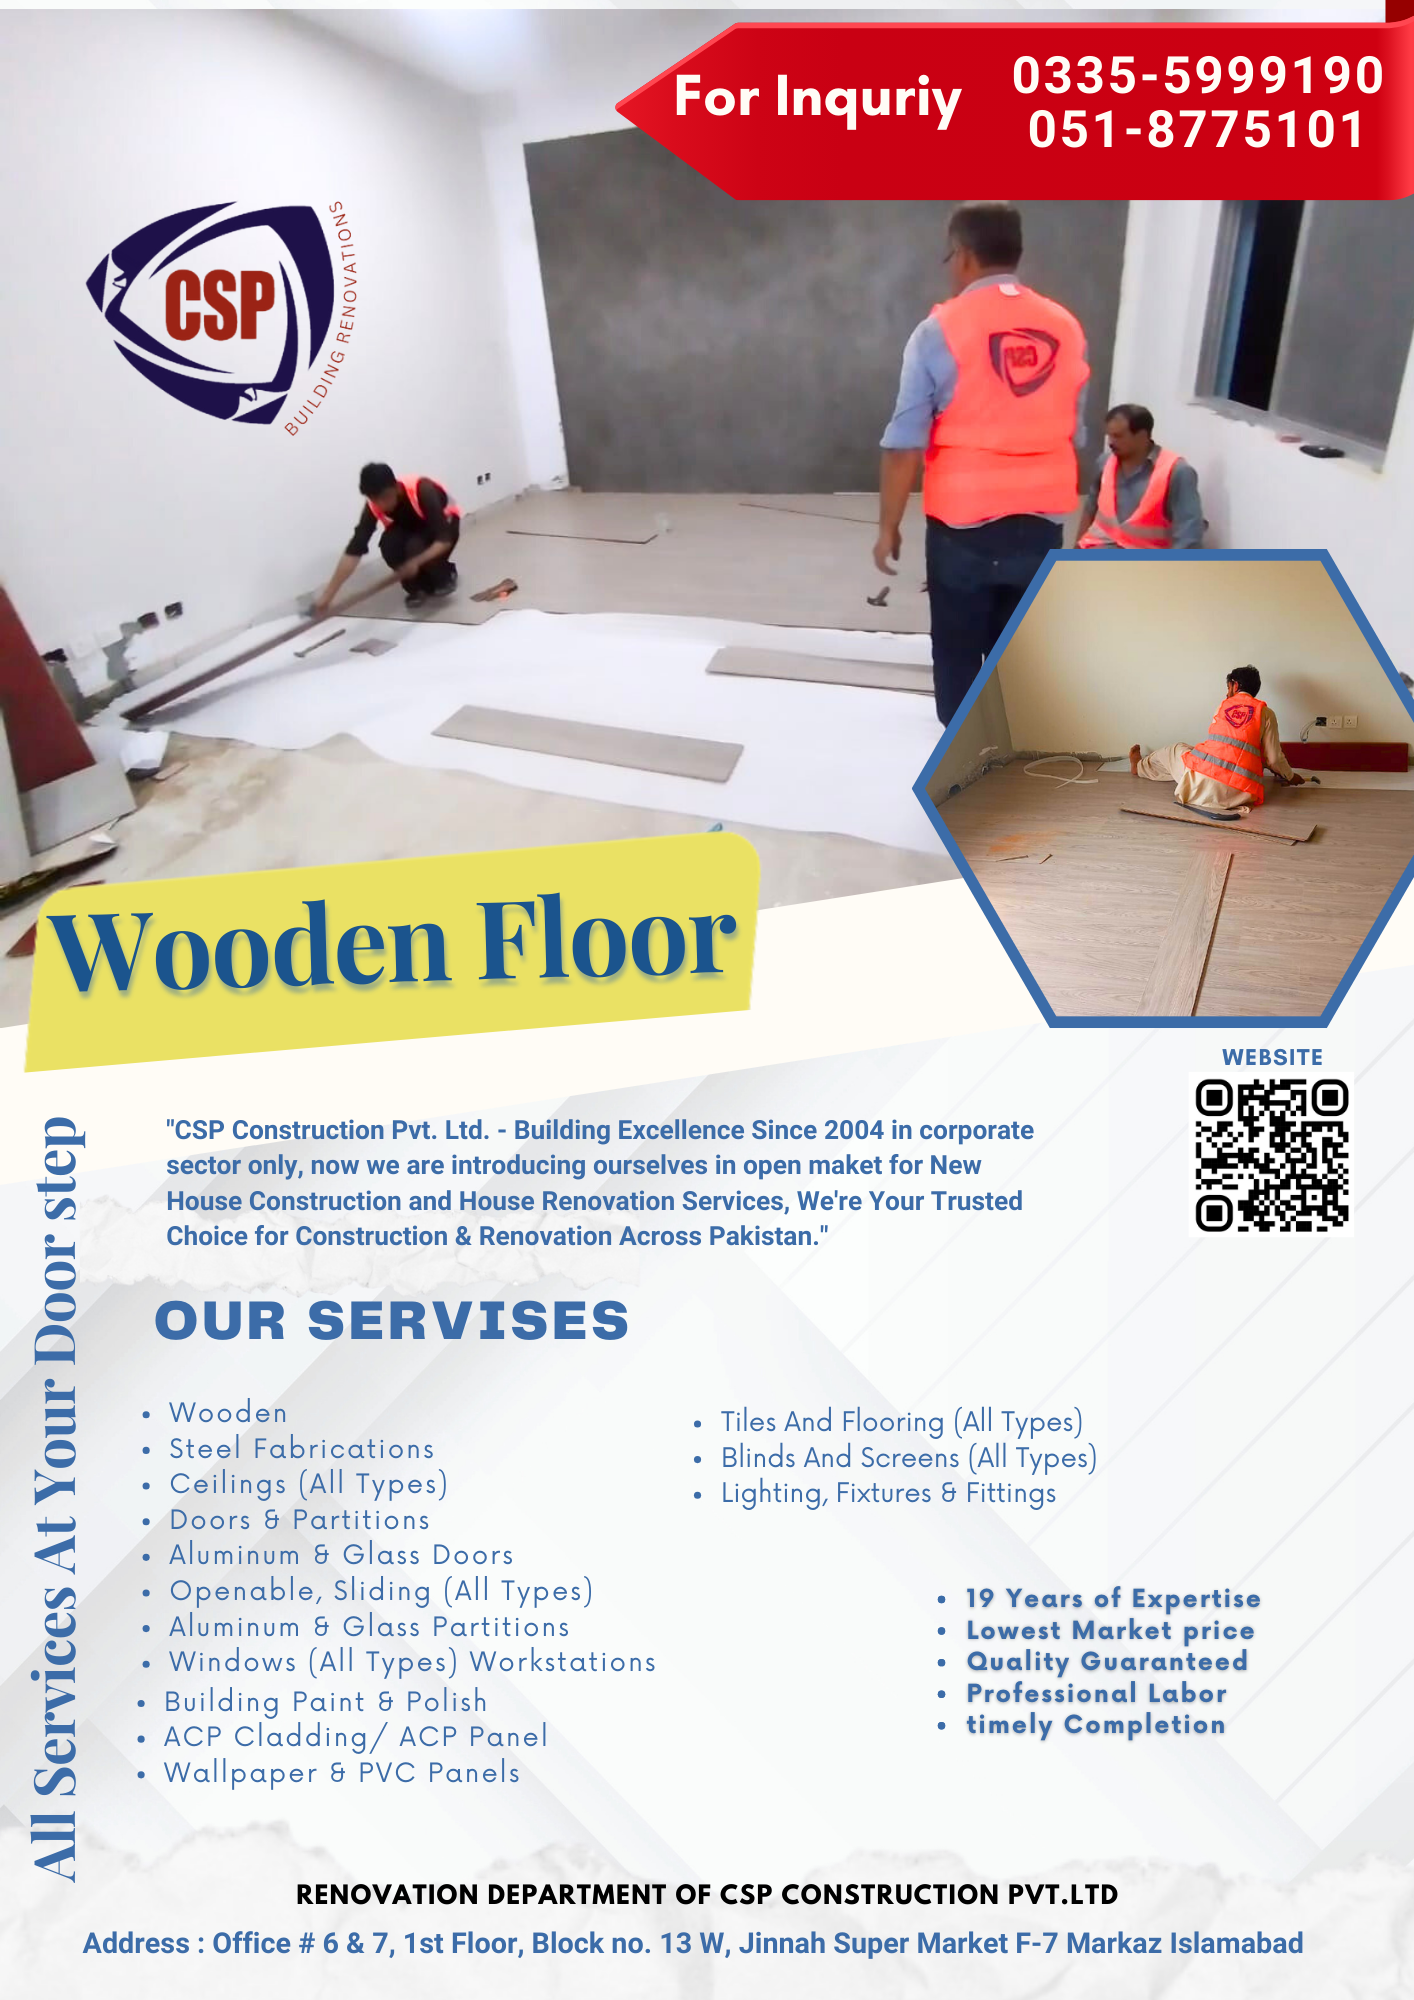 images/services/wood_floor.png